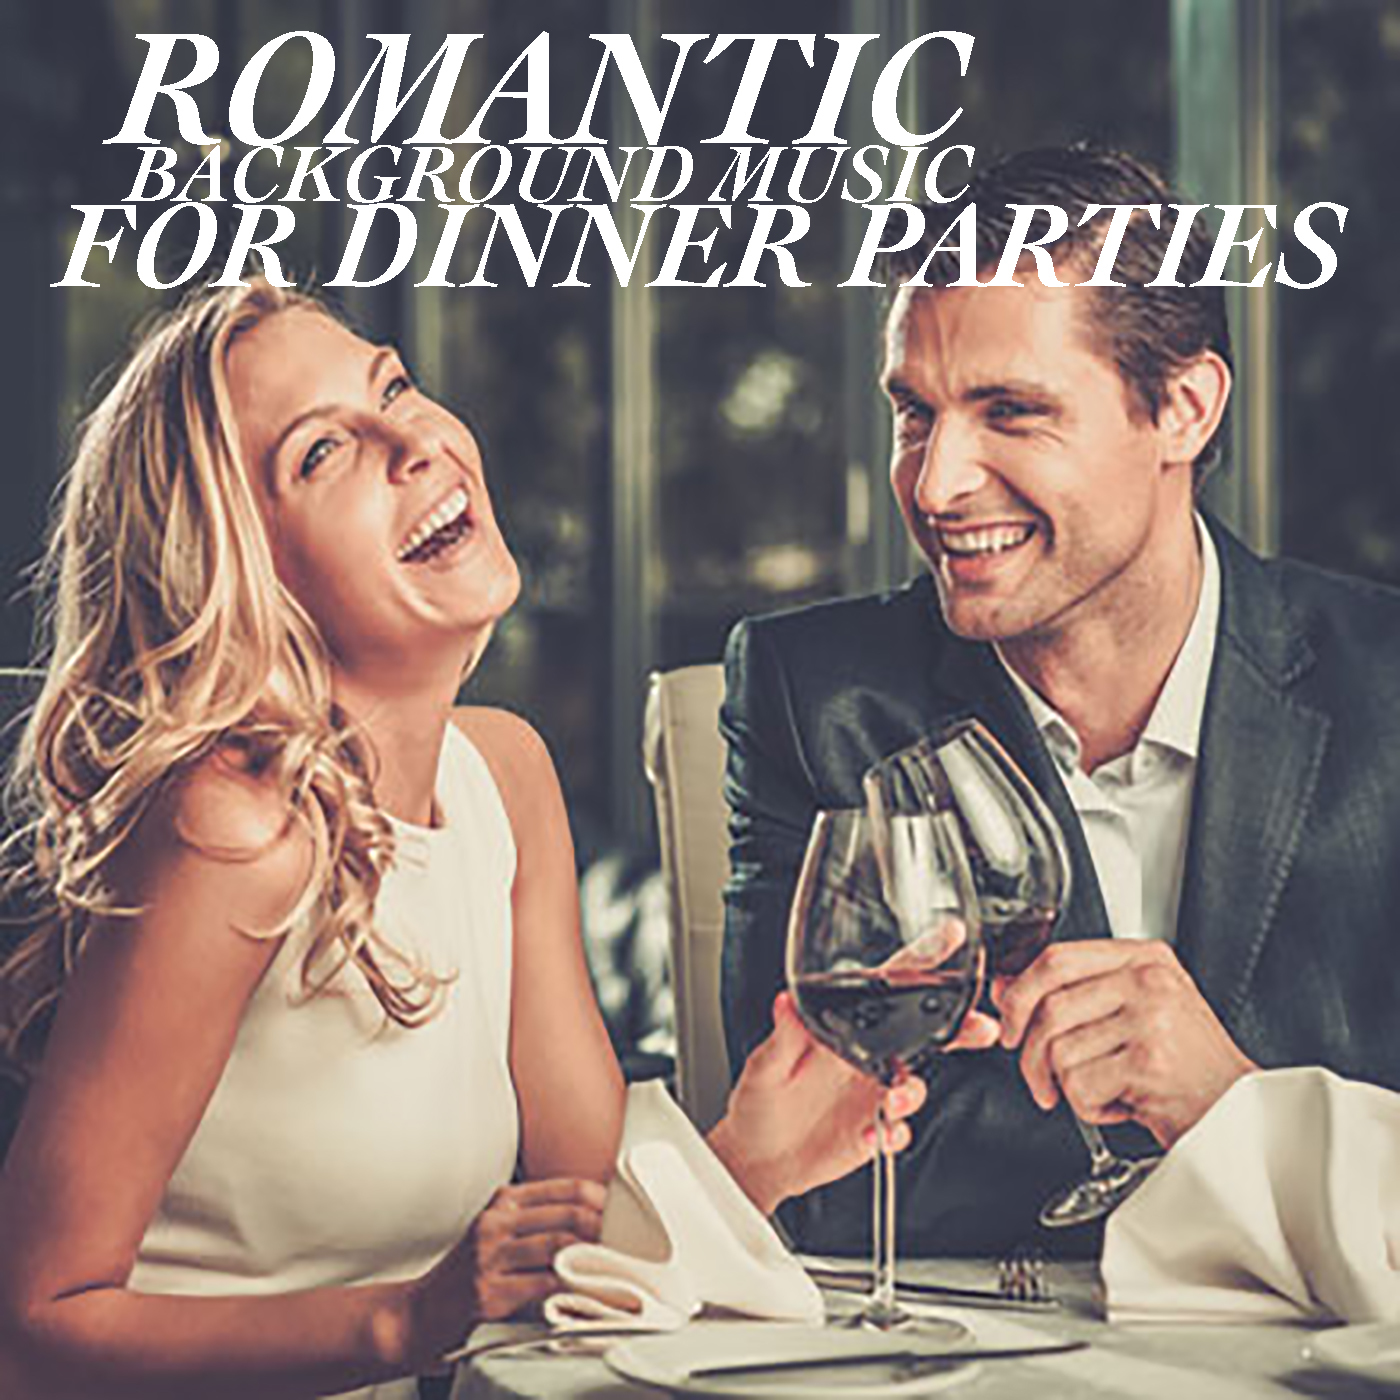 Romantic Background Music For Dinner Parties